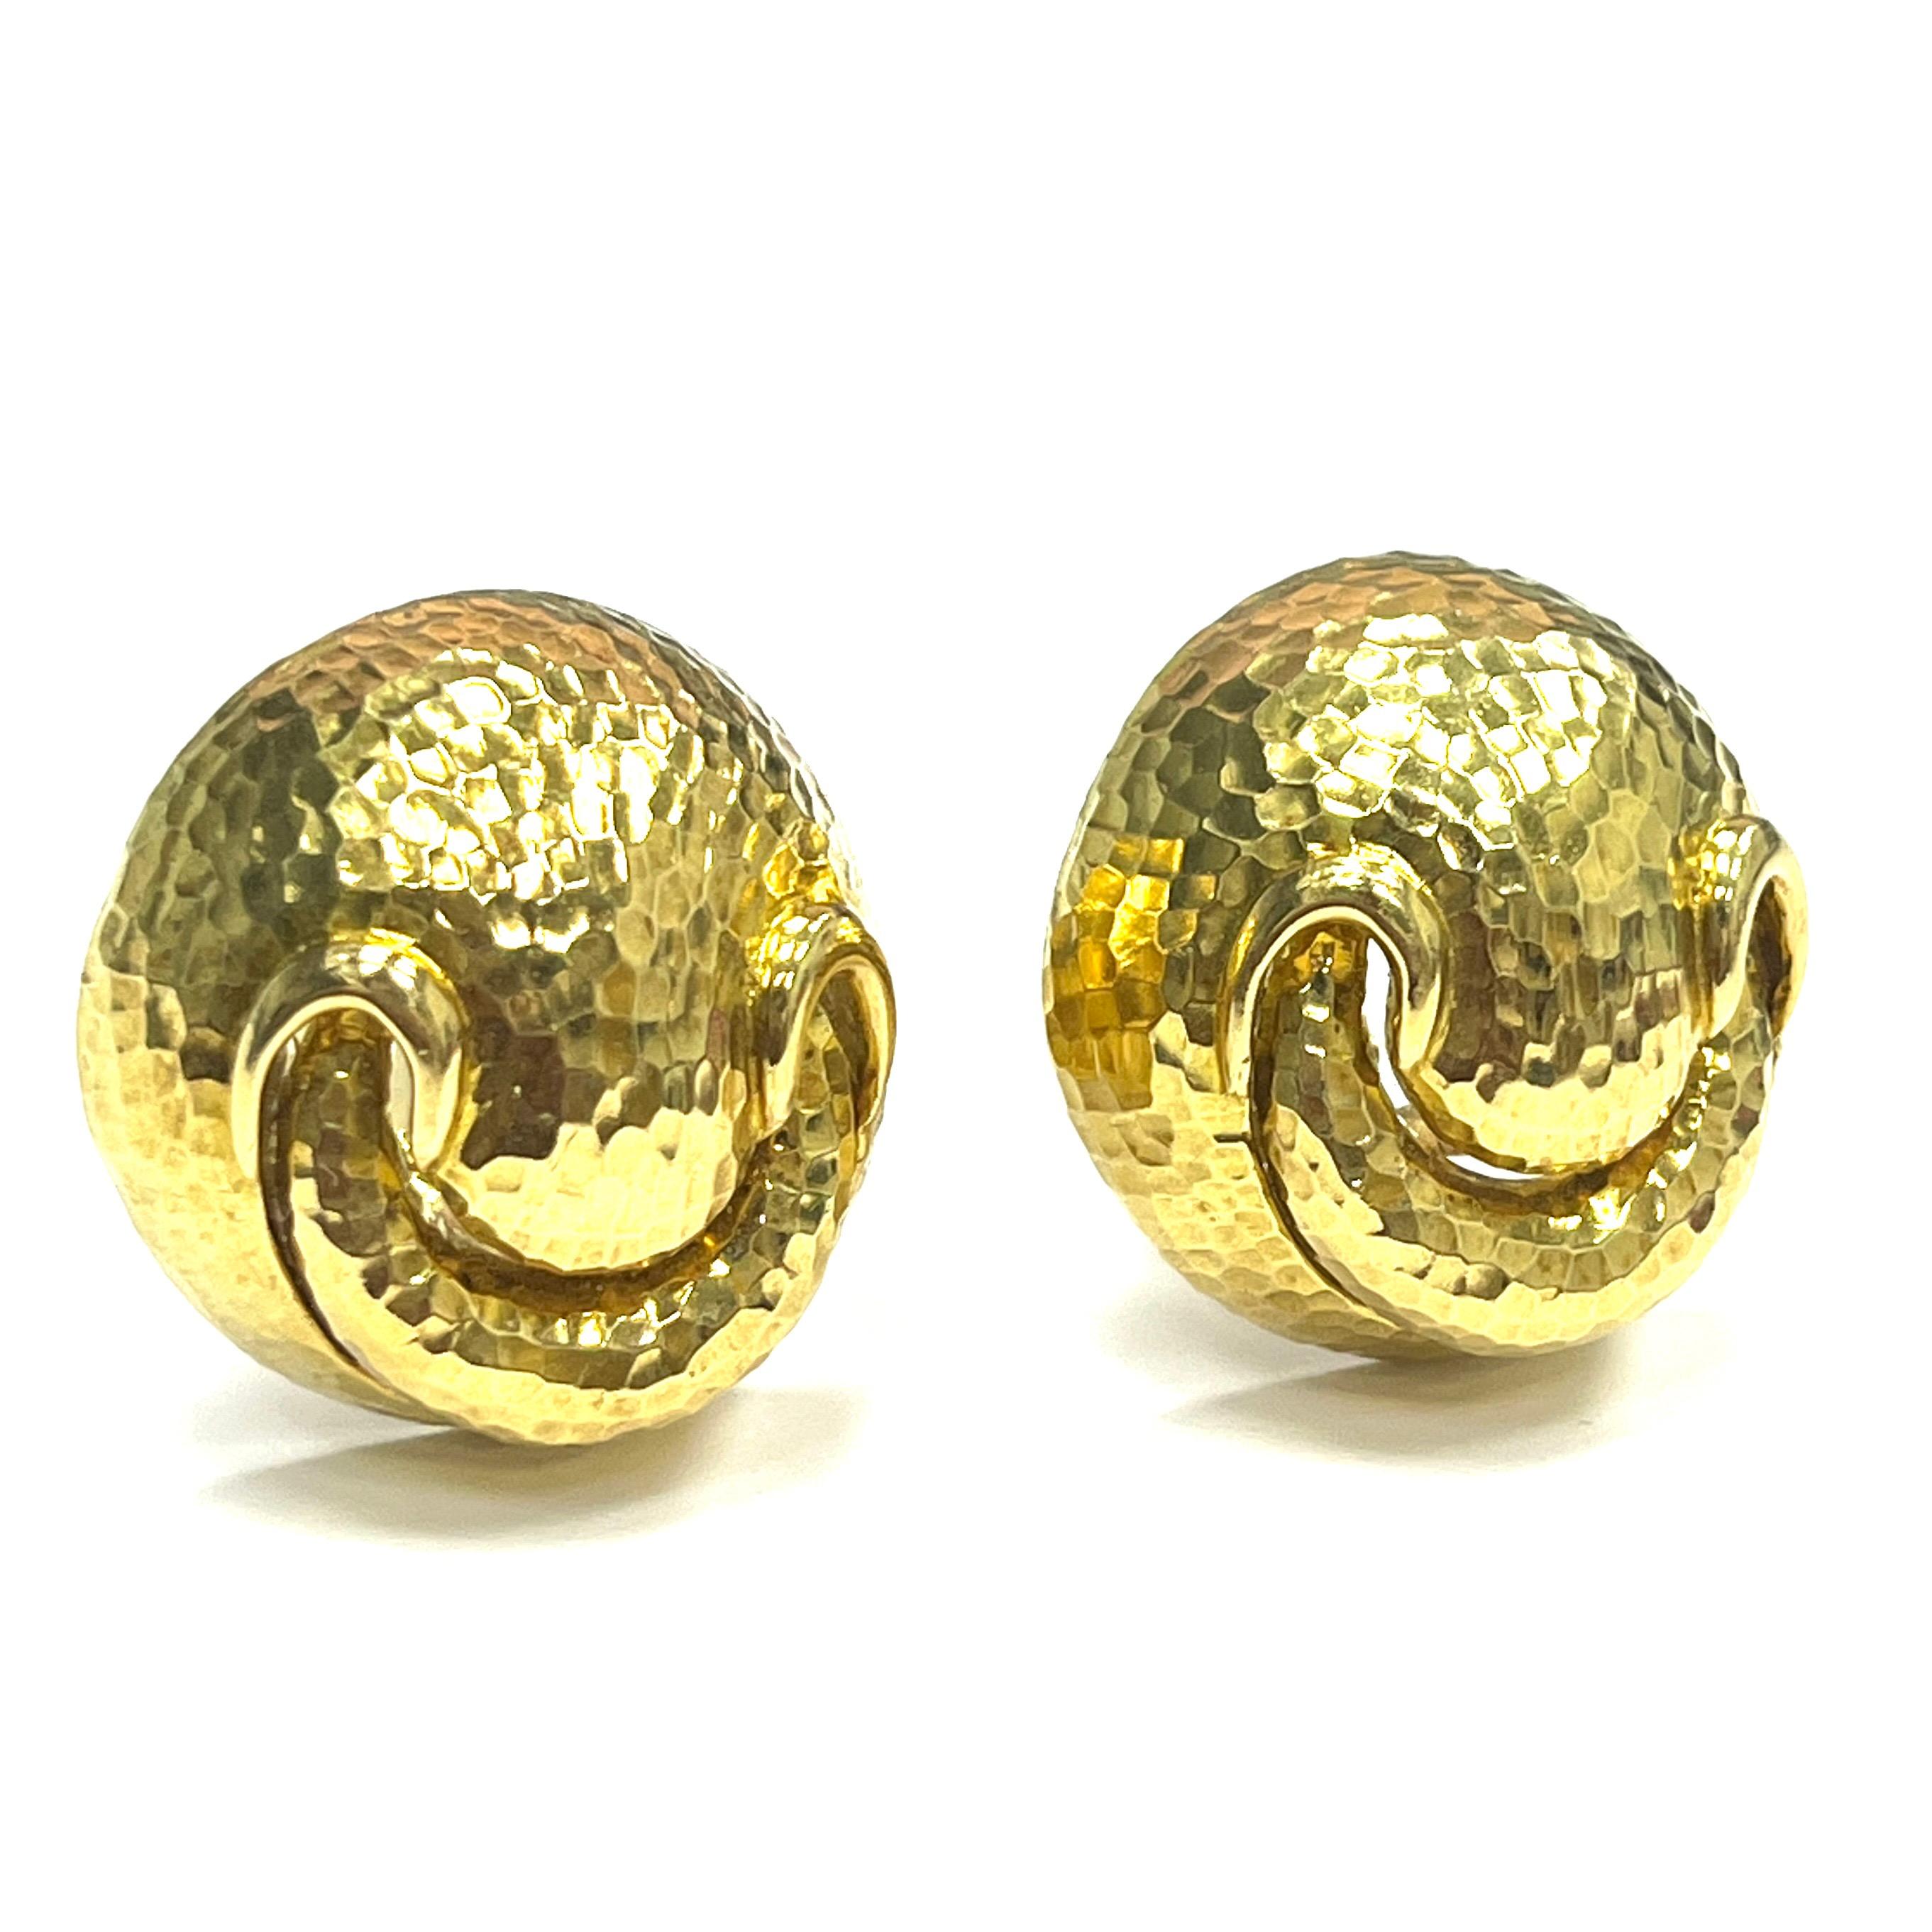 David Webb Hammered 18k Yellow Gold Round Smiley Ear Clips

Round shape hammered 18 karat yellow gold ear clips with a smile; marked Webb, 18k 

Size: width 3 cm, length 3 cm
Total weight: 45.2 grams